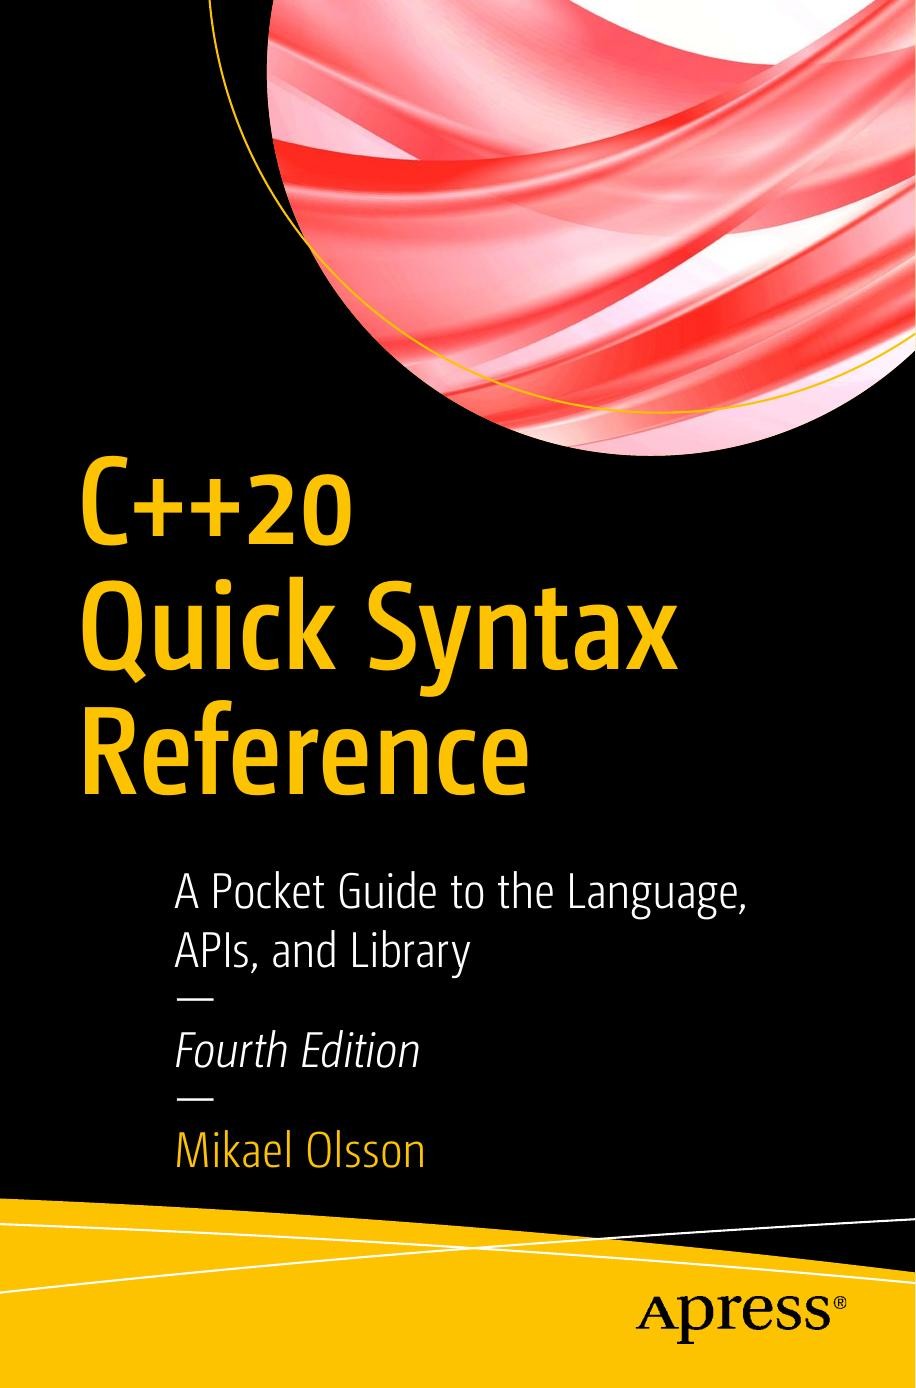 C++20 Quick Syntax Reference: A Pocket Guide to the Language, APIs, and Library